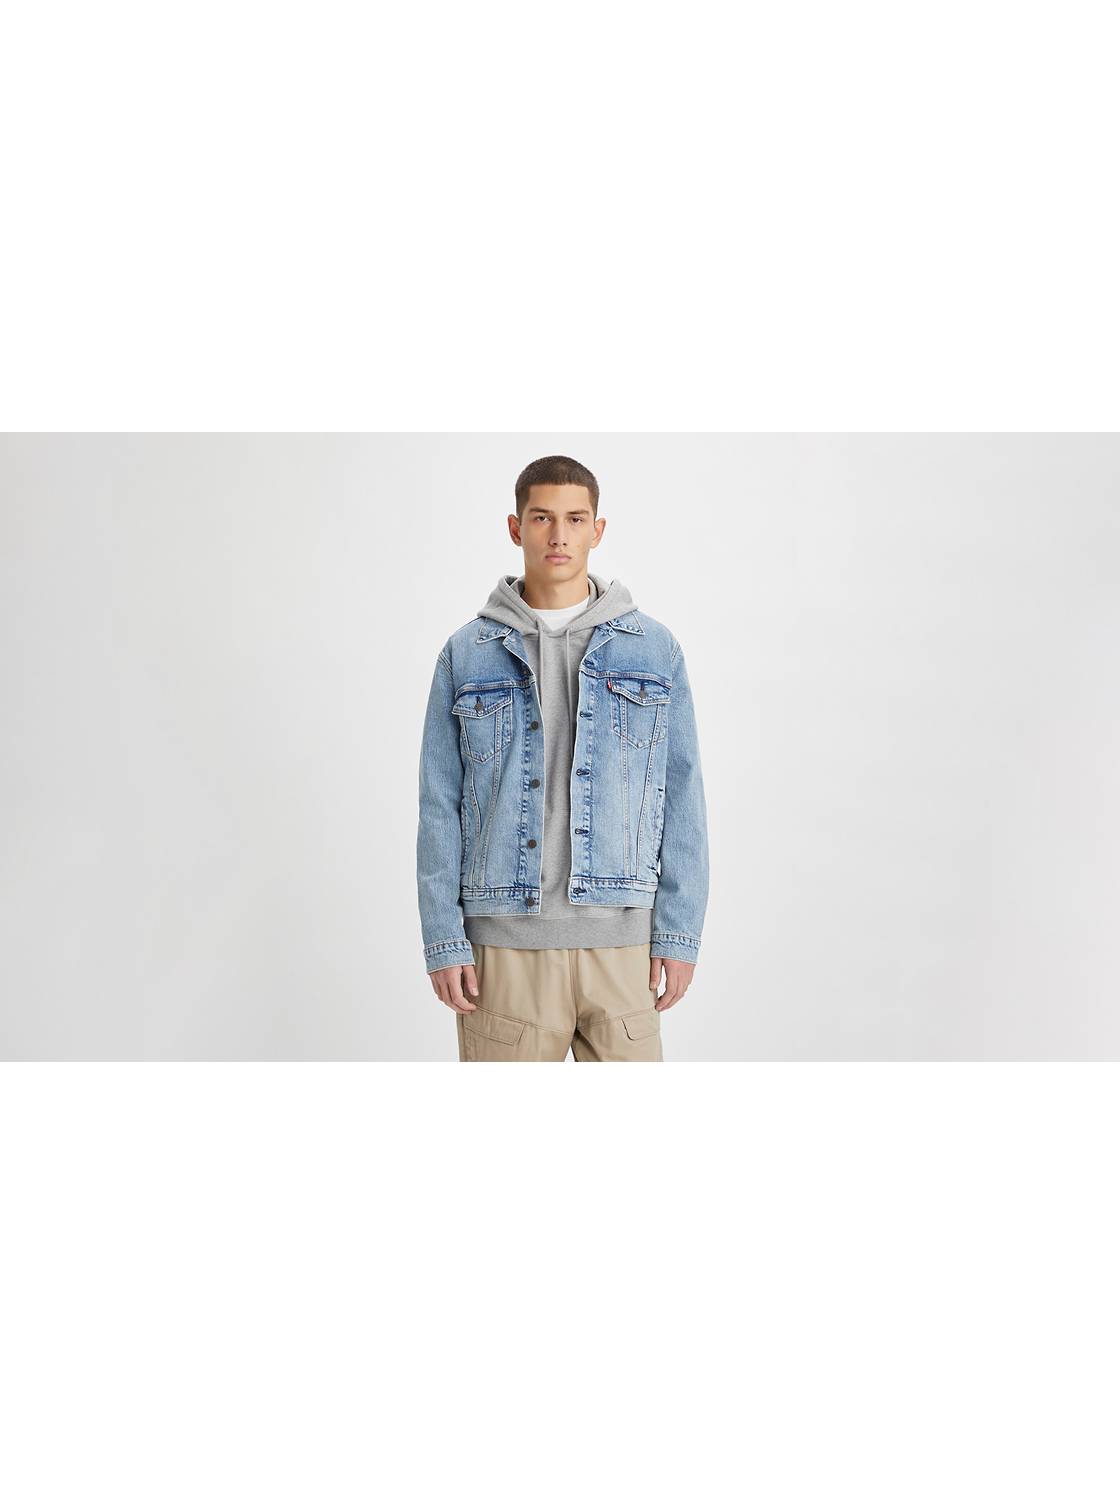 Relaxed Fit Denim Sherpa-Lined Jacket